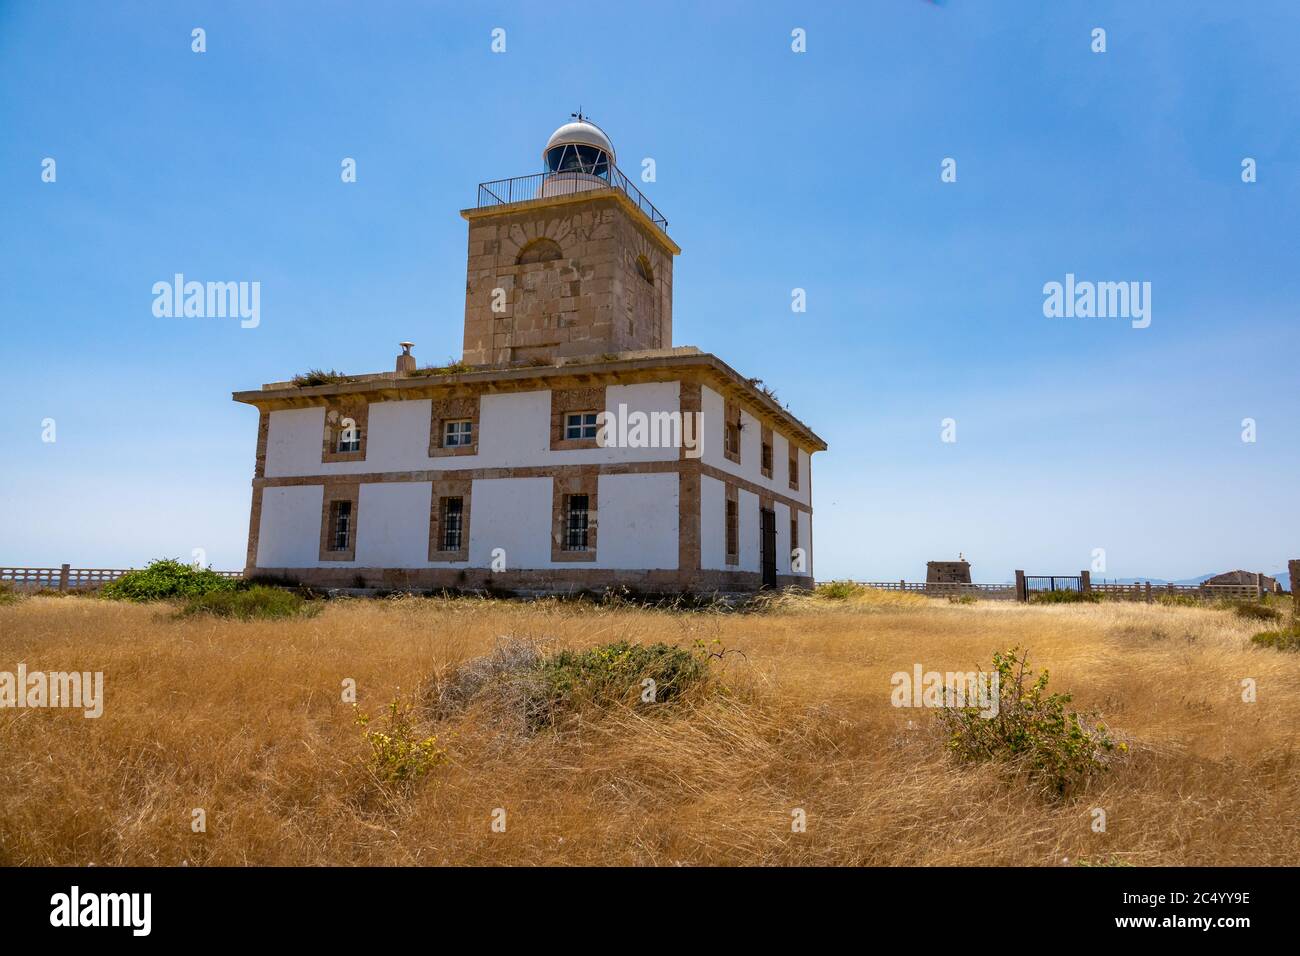 Lighthouse of Tabarca built in 1857. It is in the province of Alicante, Spain. Stock Photo